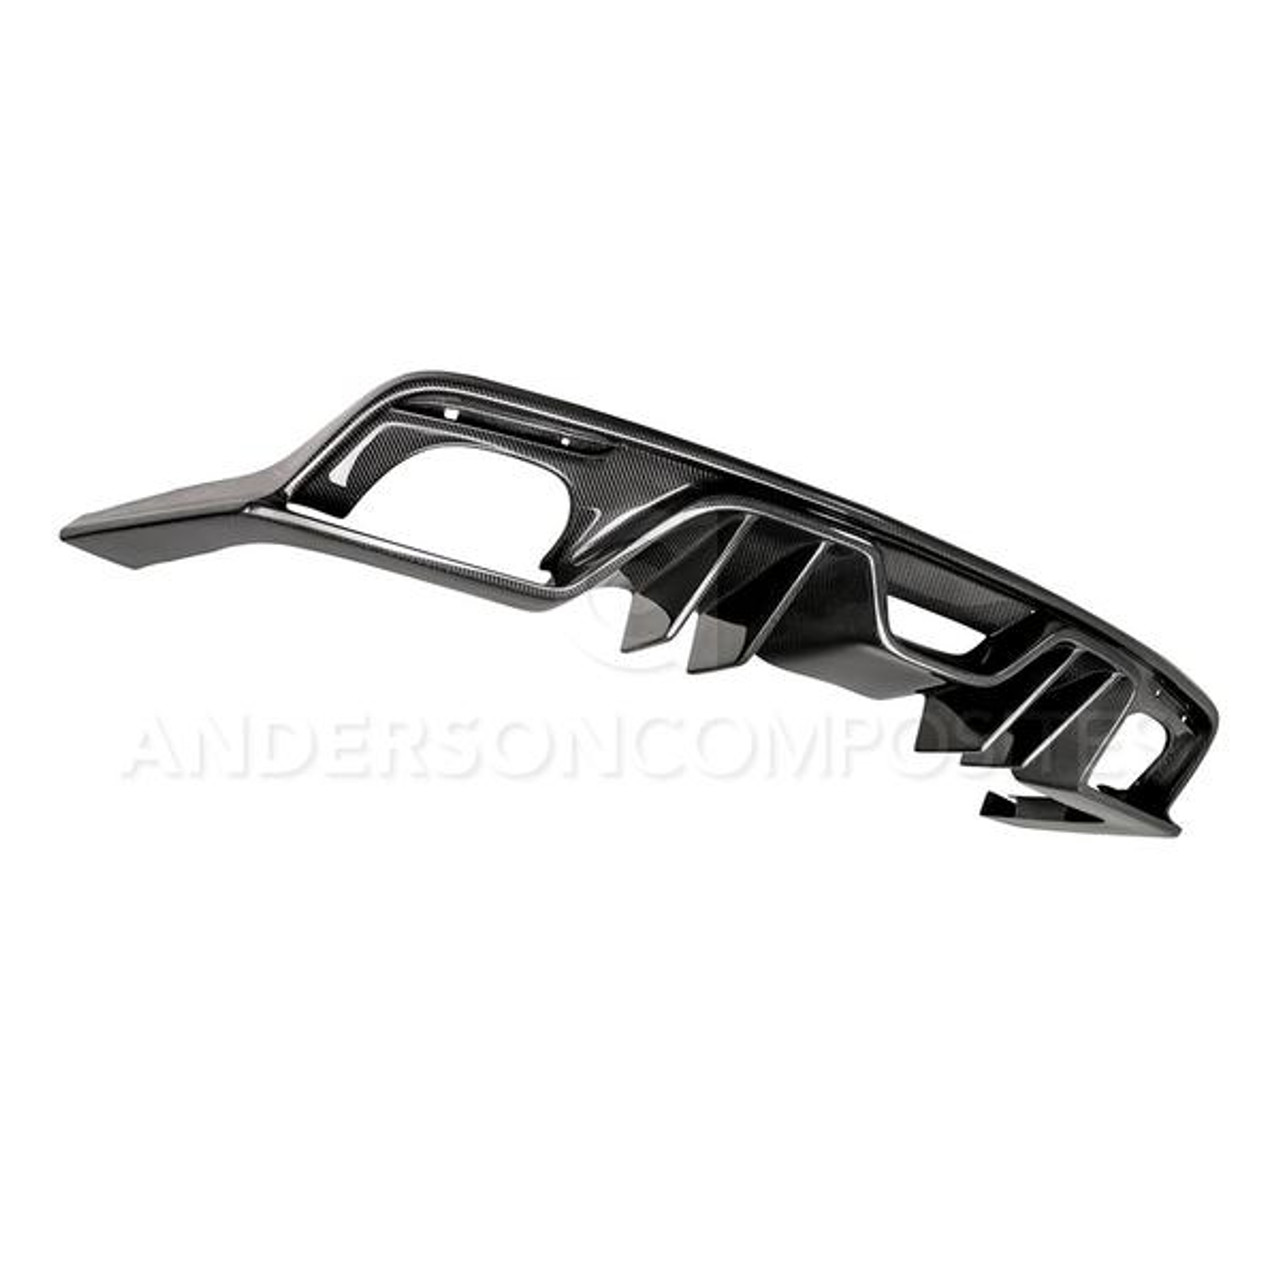 Anderson Composites 2015 - 2017 Mustang Carbon Fiber Rear Diffuser for Quad Tip Exhaust